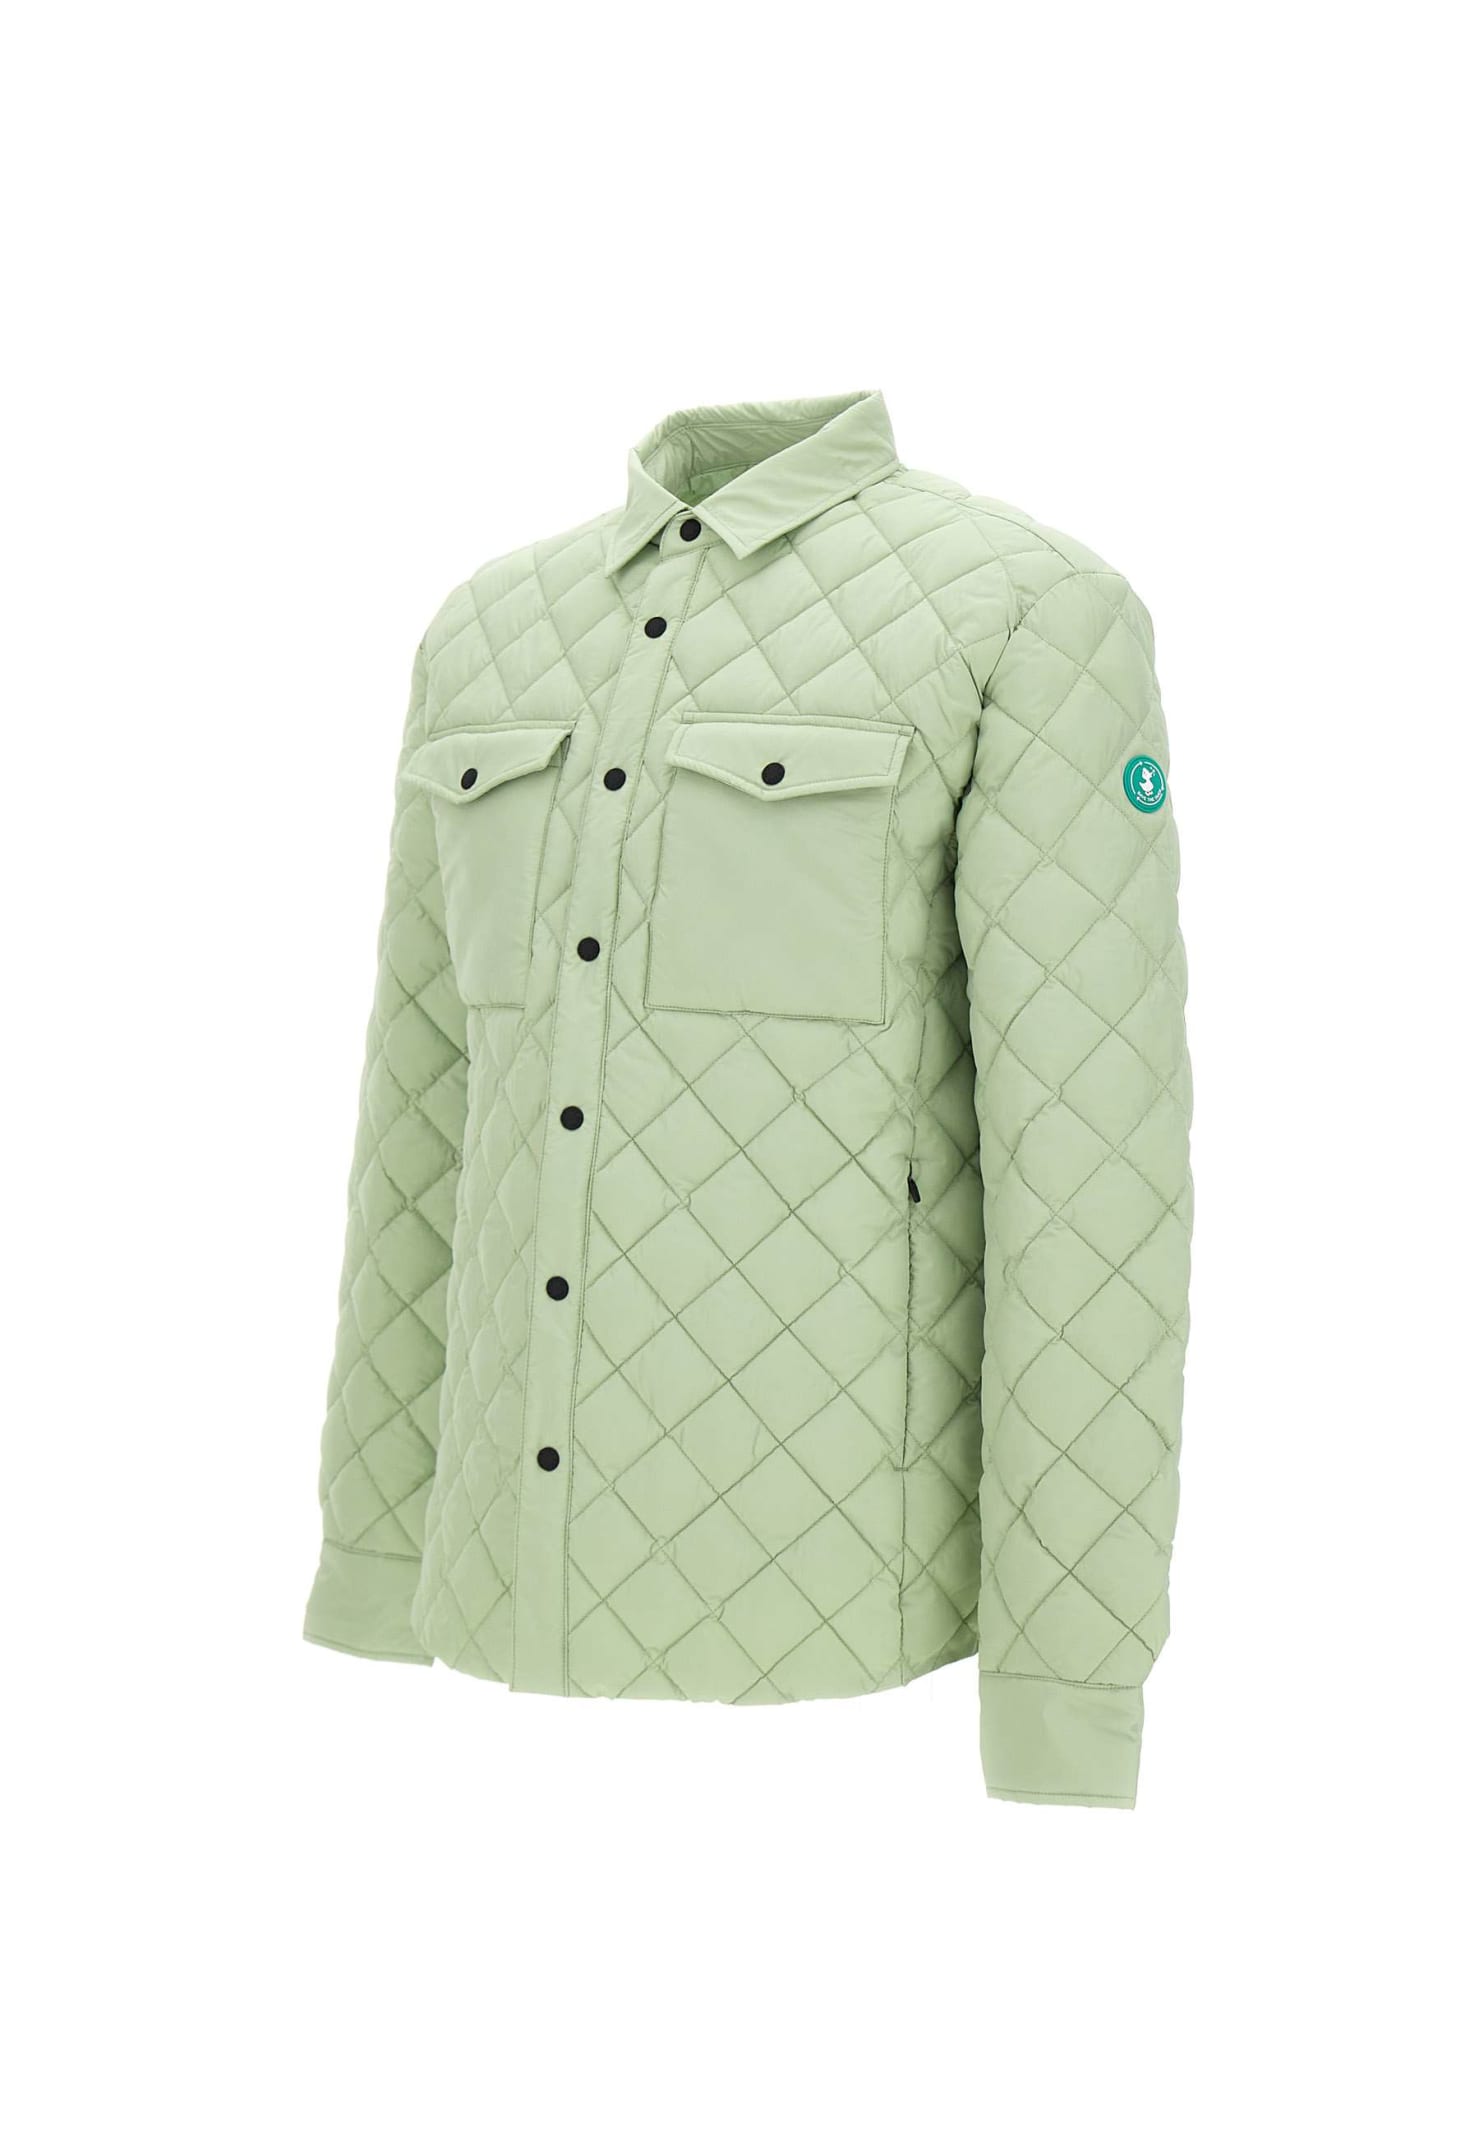 Shop Save The Duck Recy16ozzie Jacket